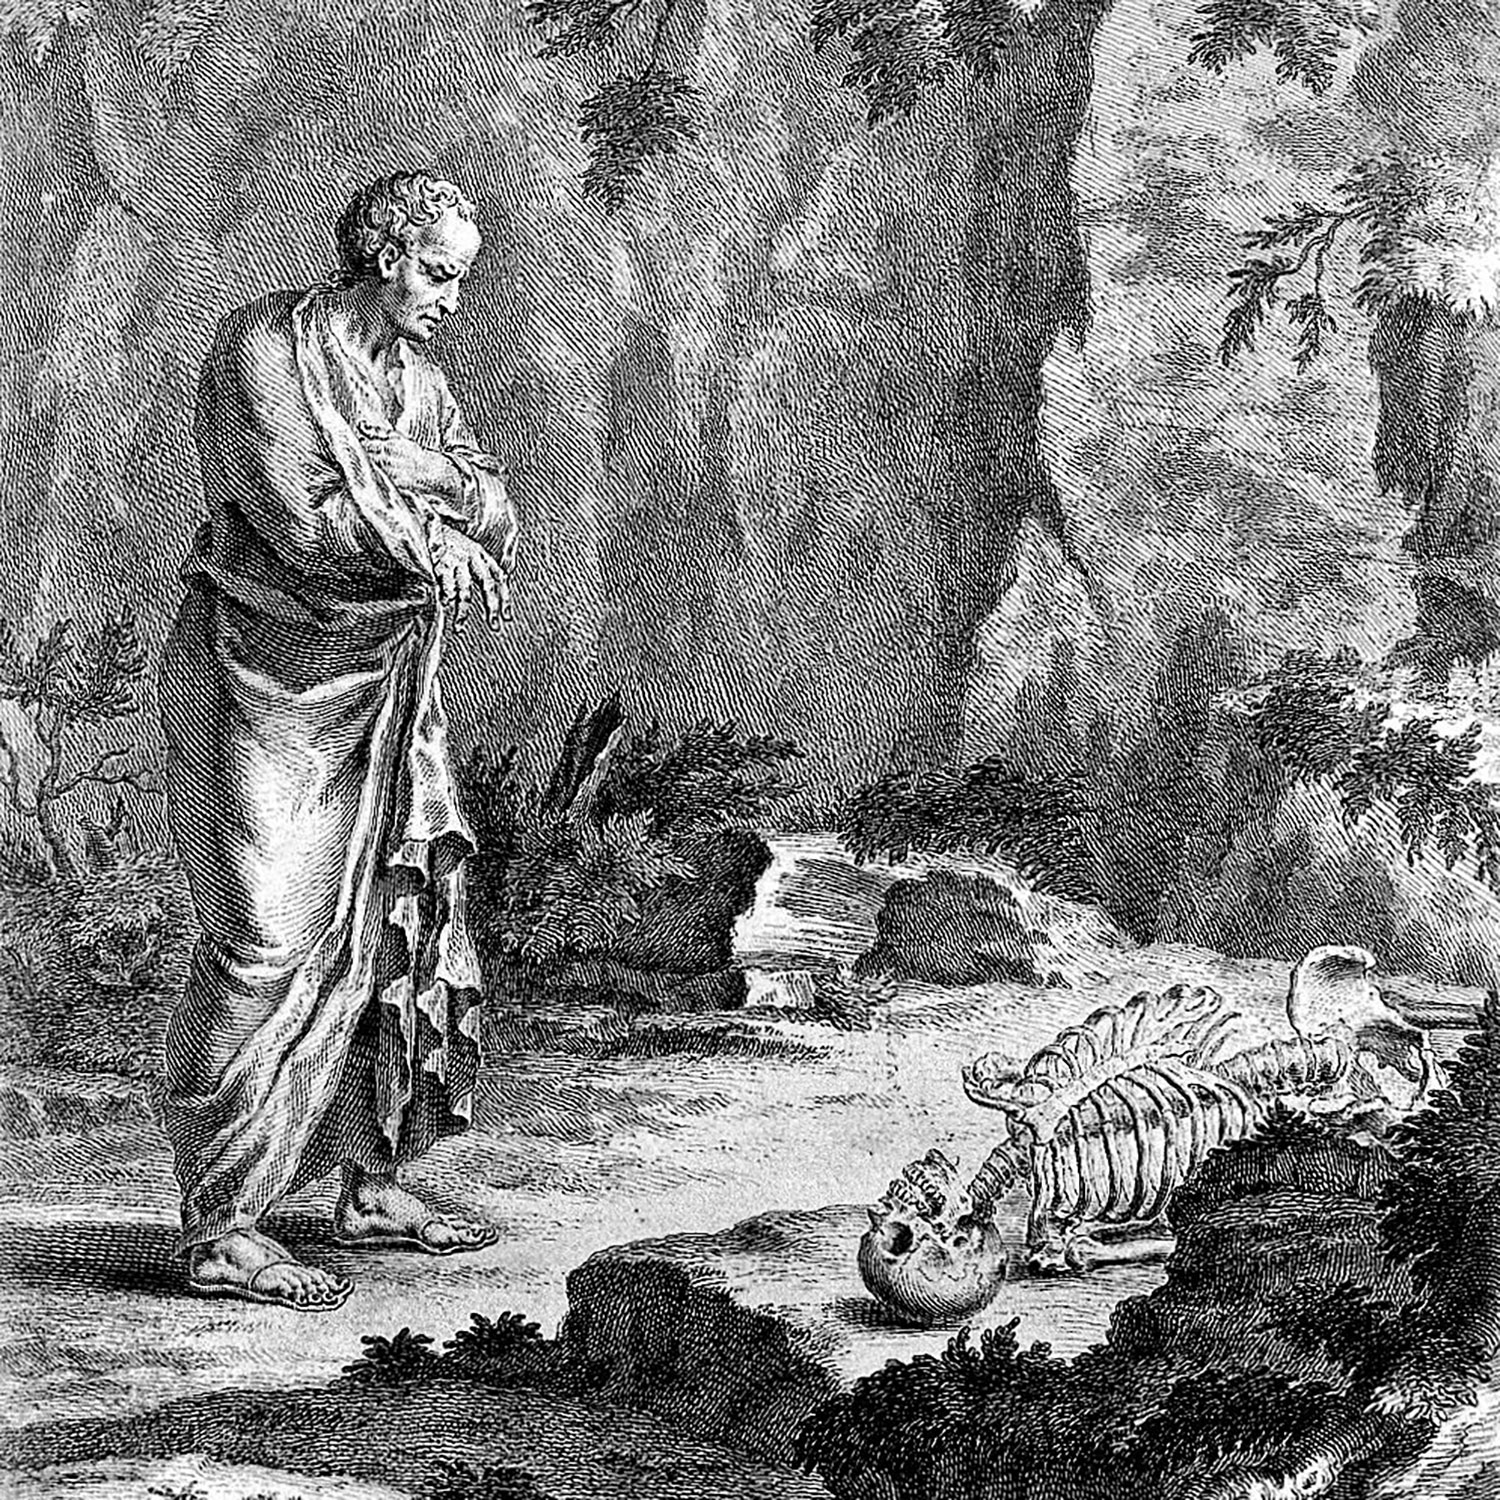 Galen observes with some dismay the skeleton of a bandit along a byway